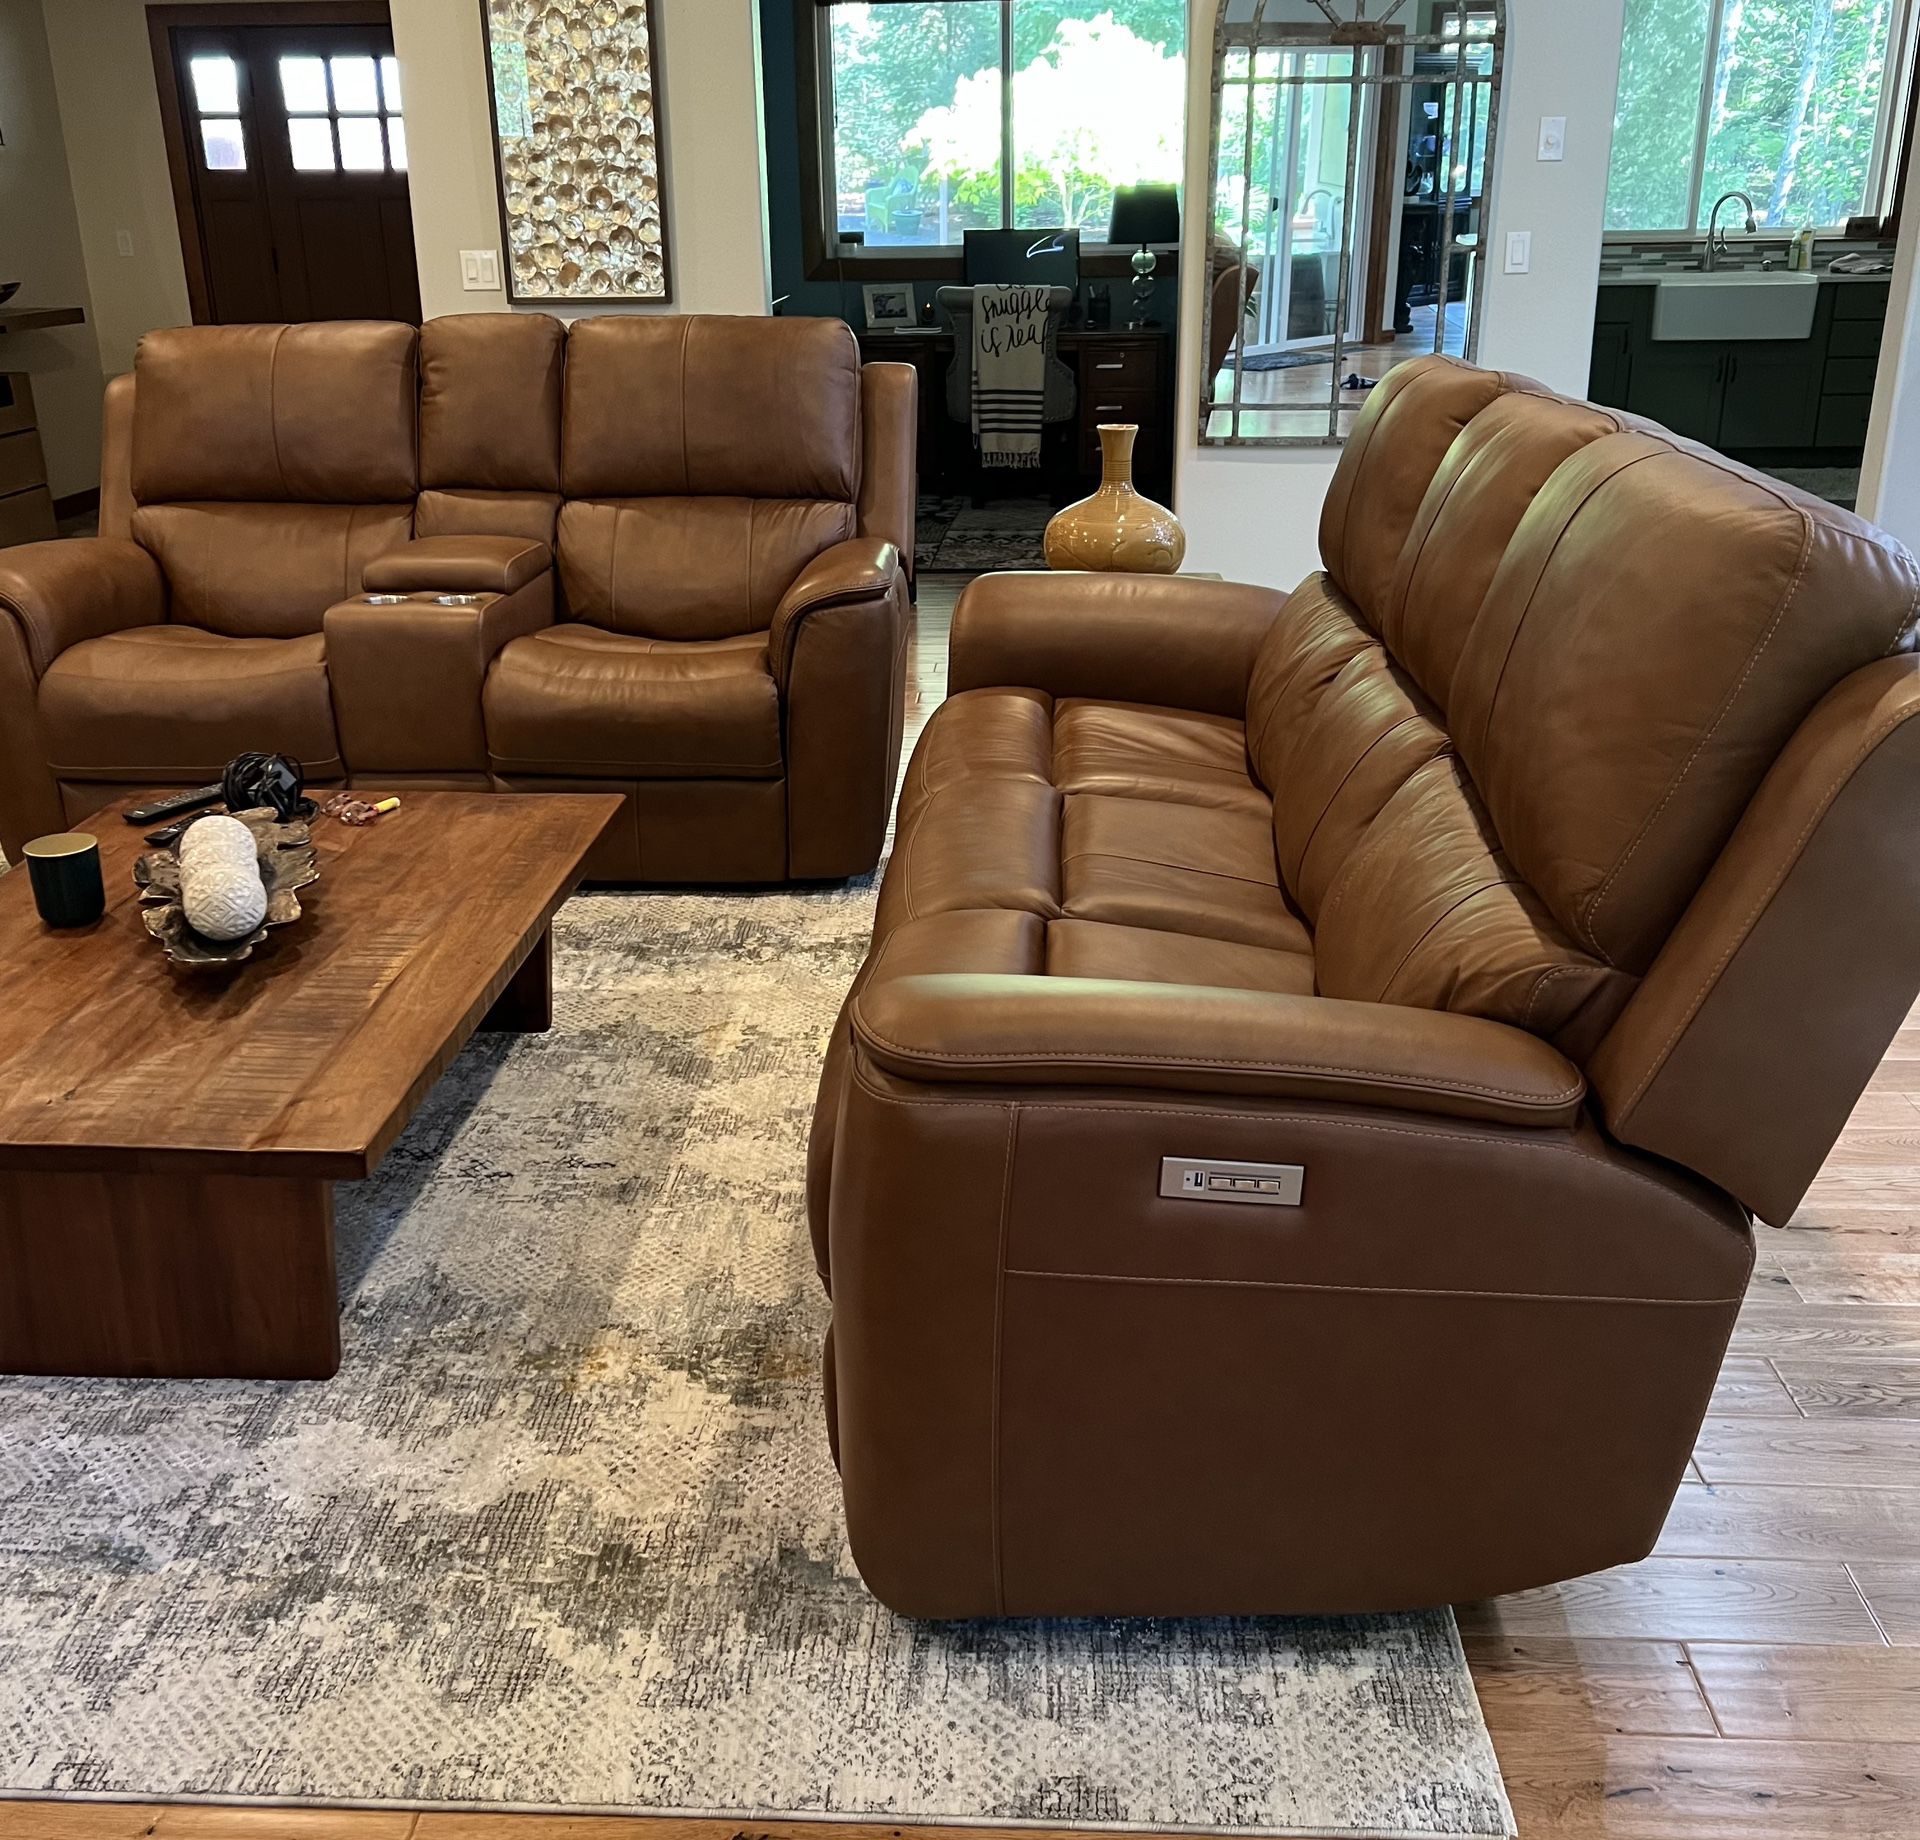 Flex steel Henry Tan Leather Power Reclining Sofa And Loveseat